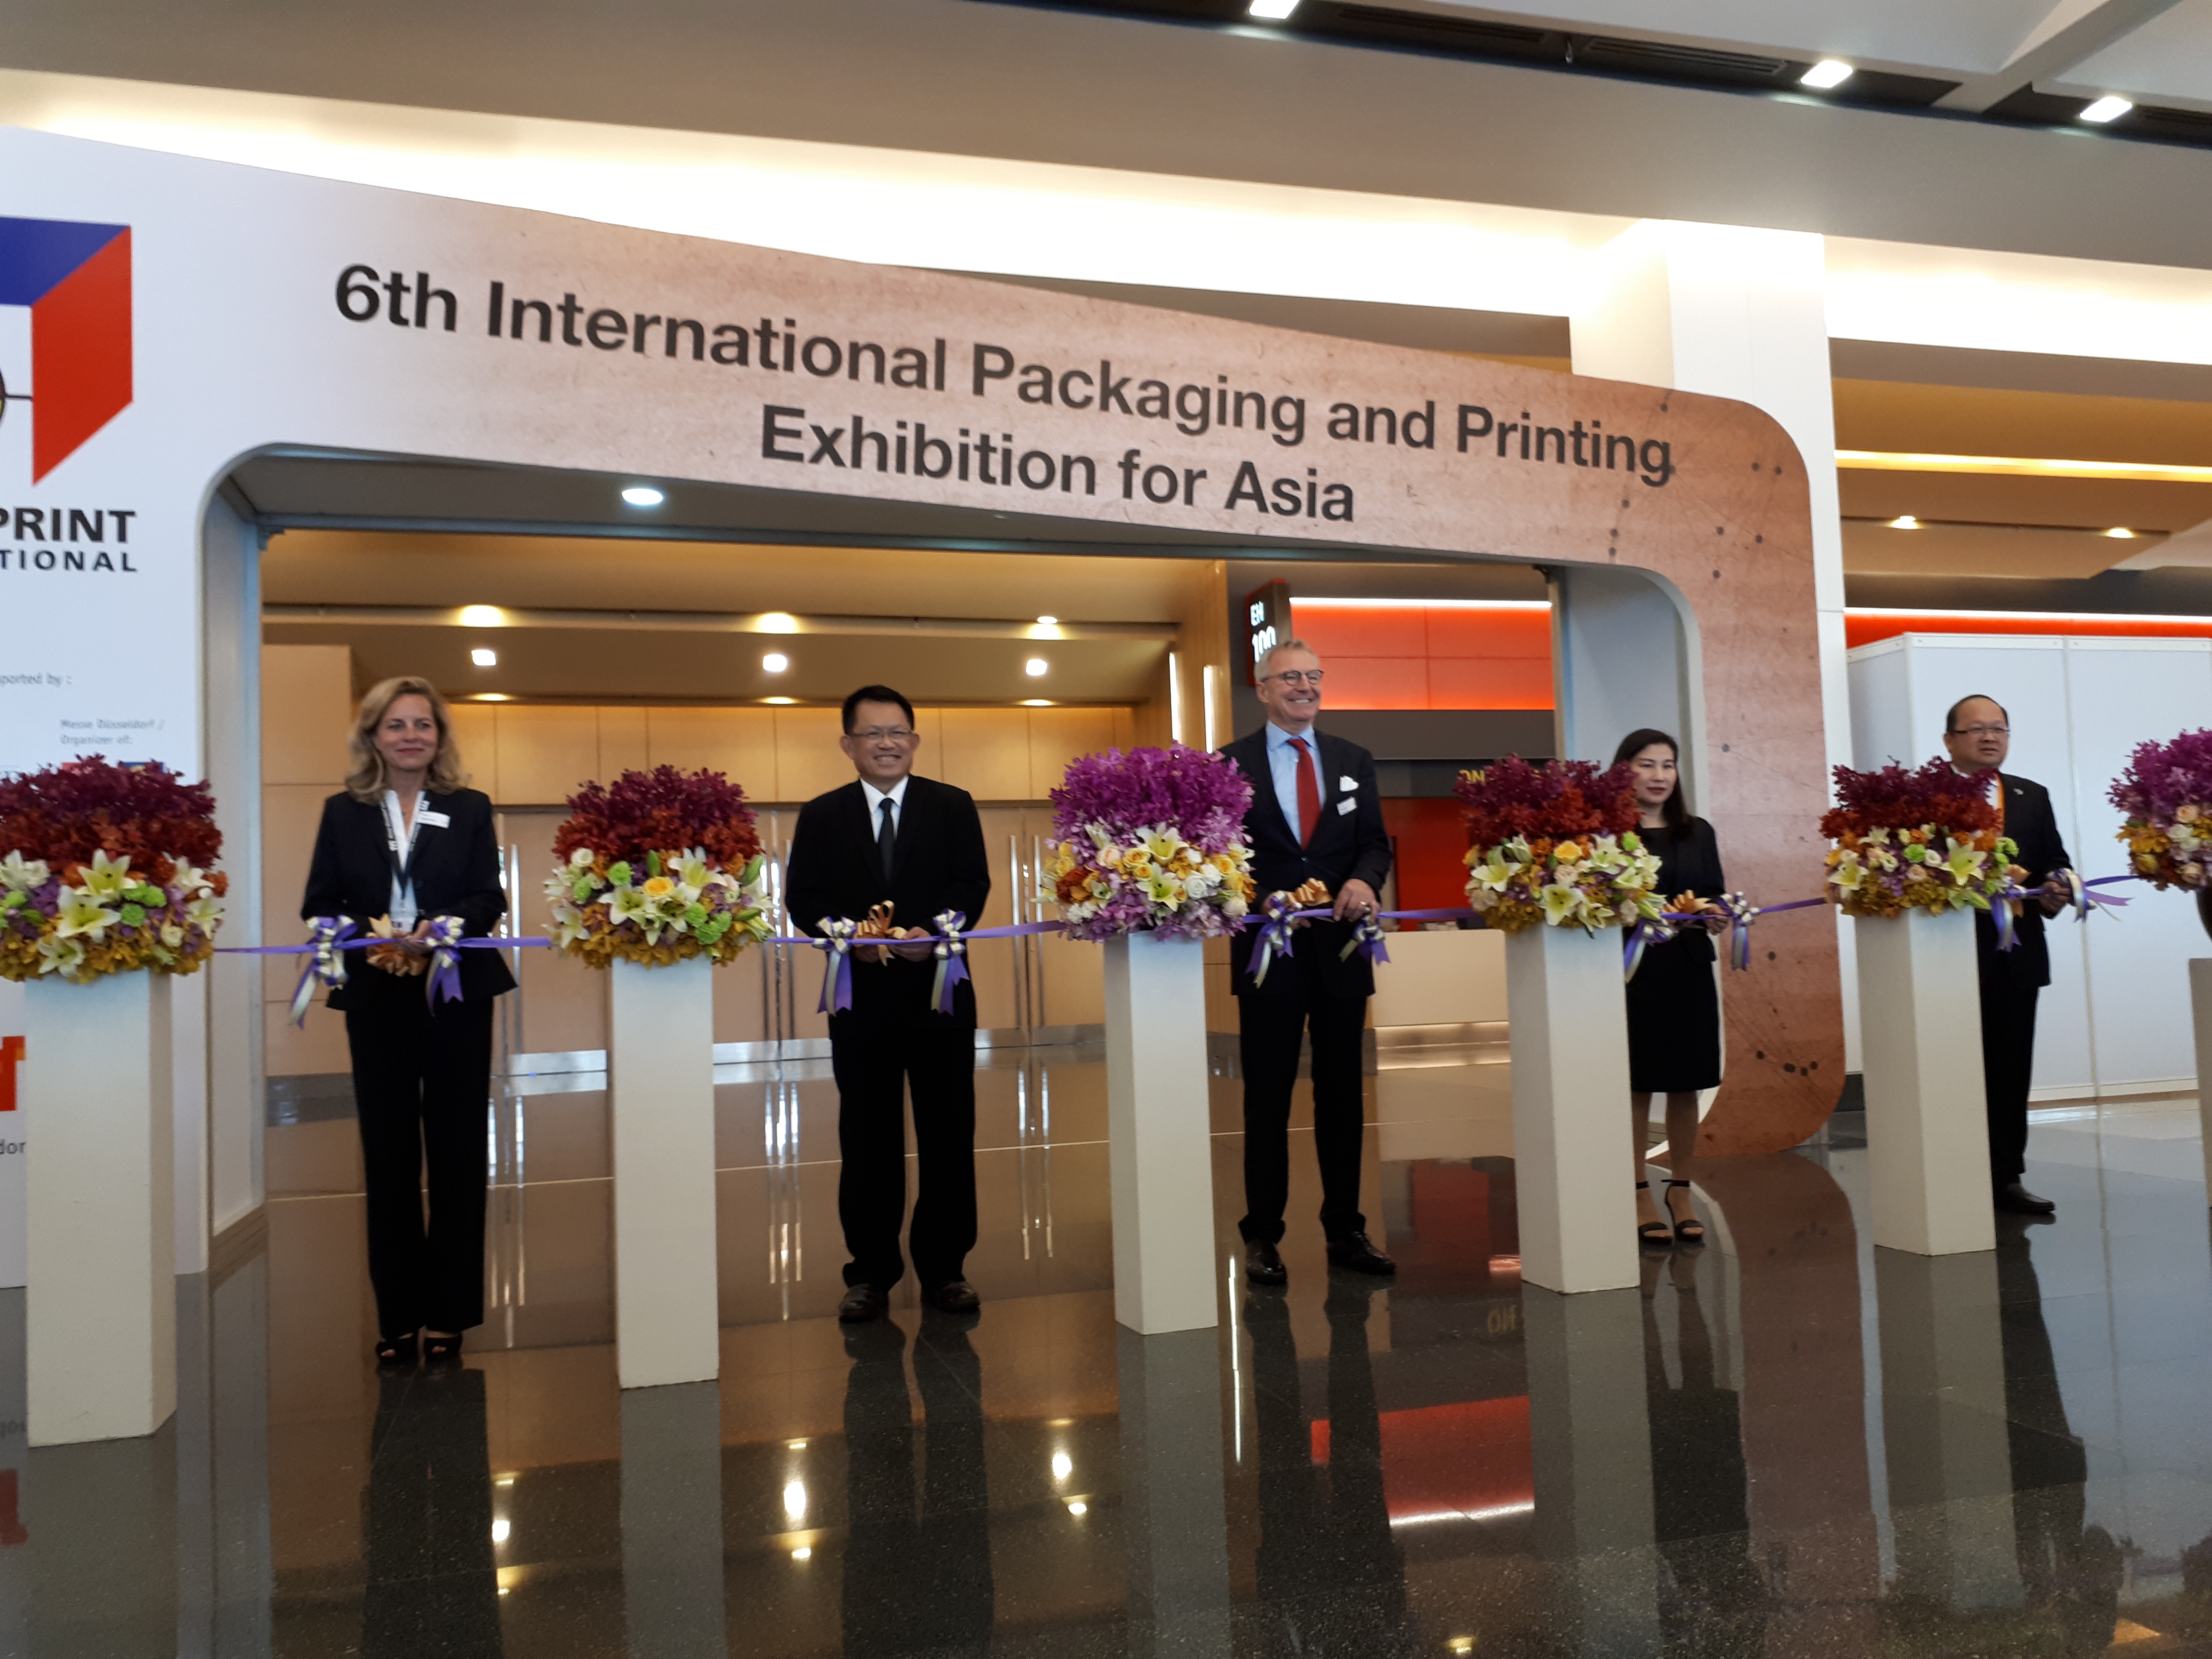 pack print international promotes cross trade partnerships in southeast asia